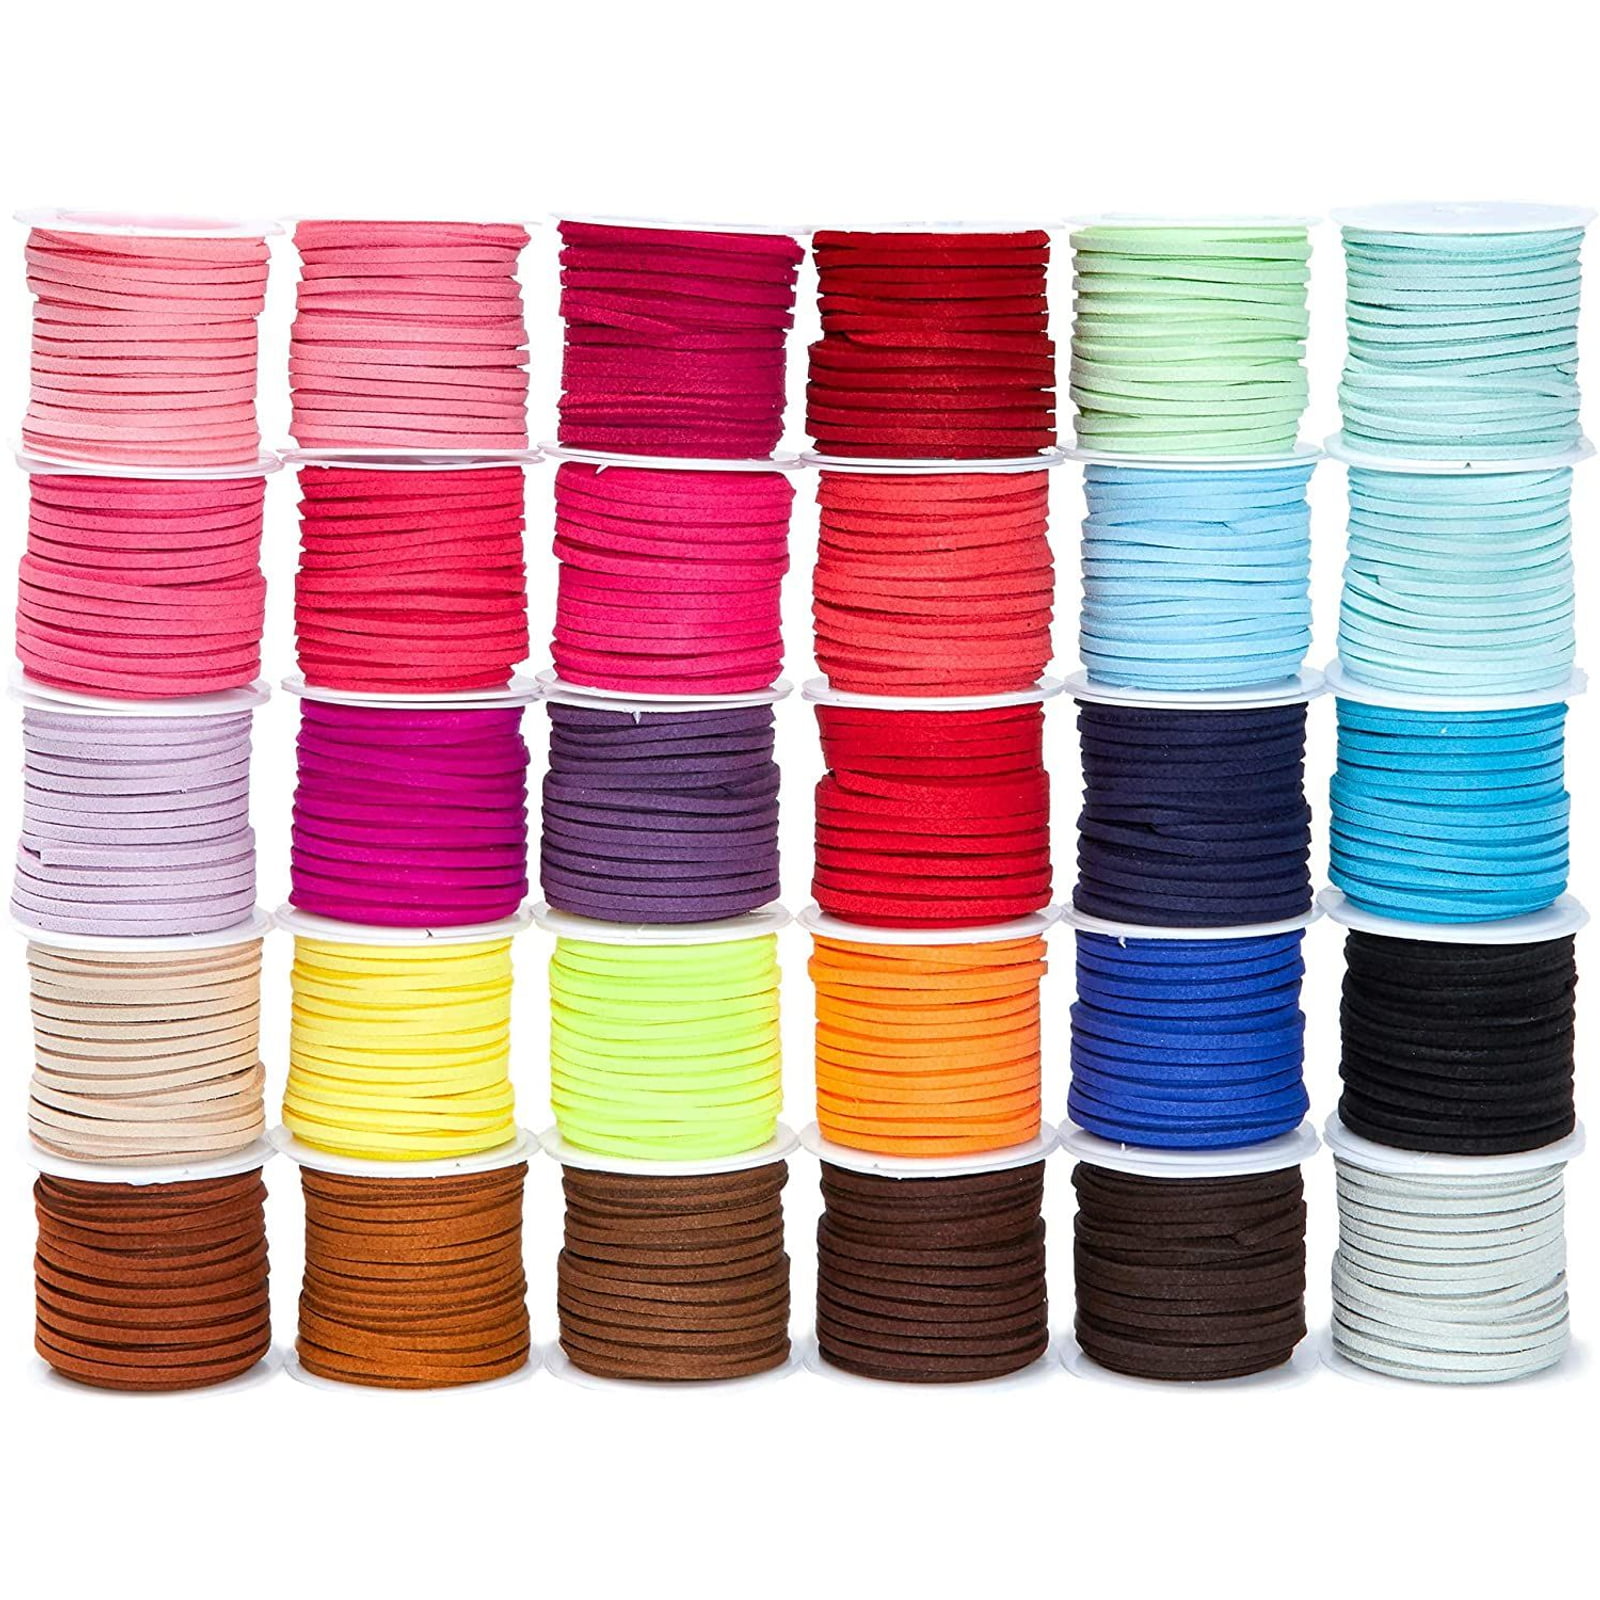 5Yards Spool Wax Coated Beading Cord String Cording for Beads & Jewelry 1.5MM 